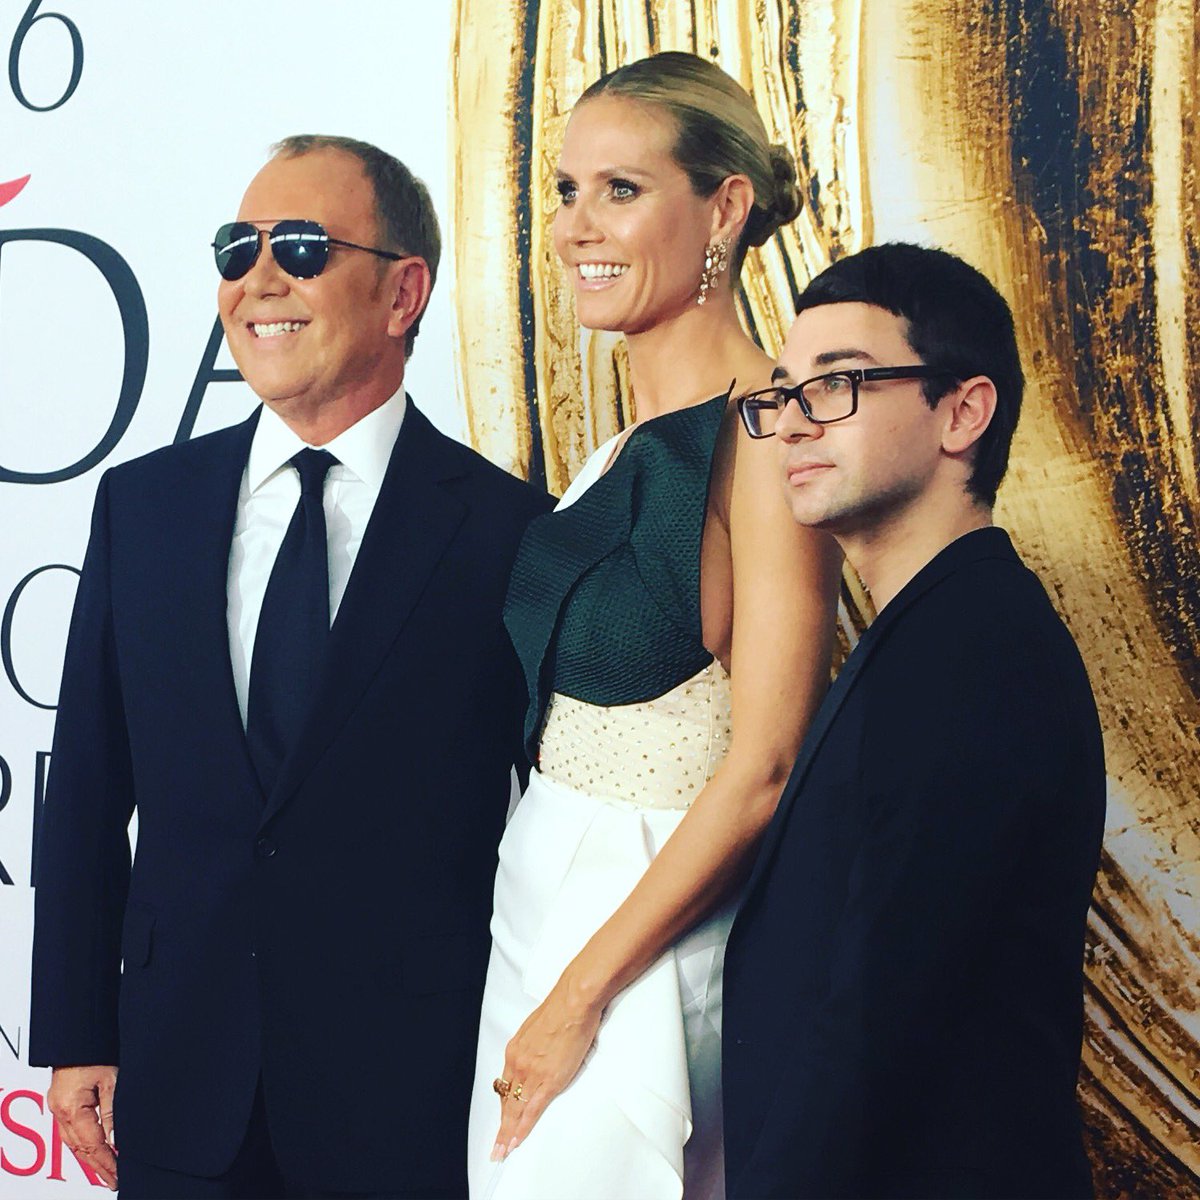 Flanked by great talent ????????@michaelkors @csiriano  #cfda https://t.co/CBjQOzjc06